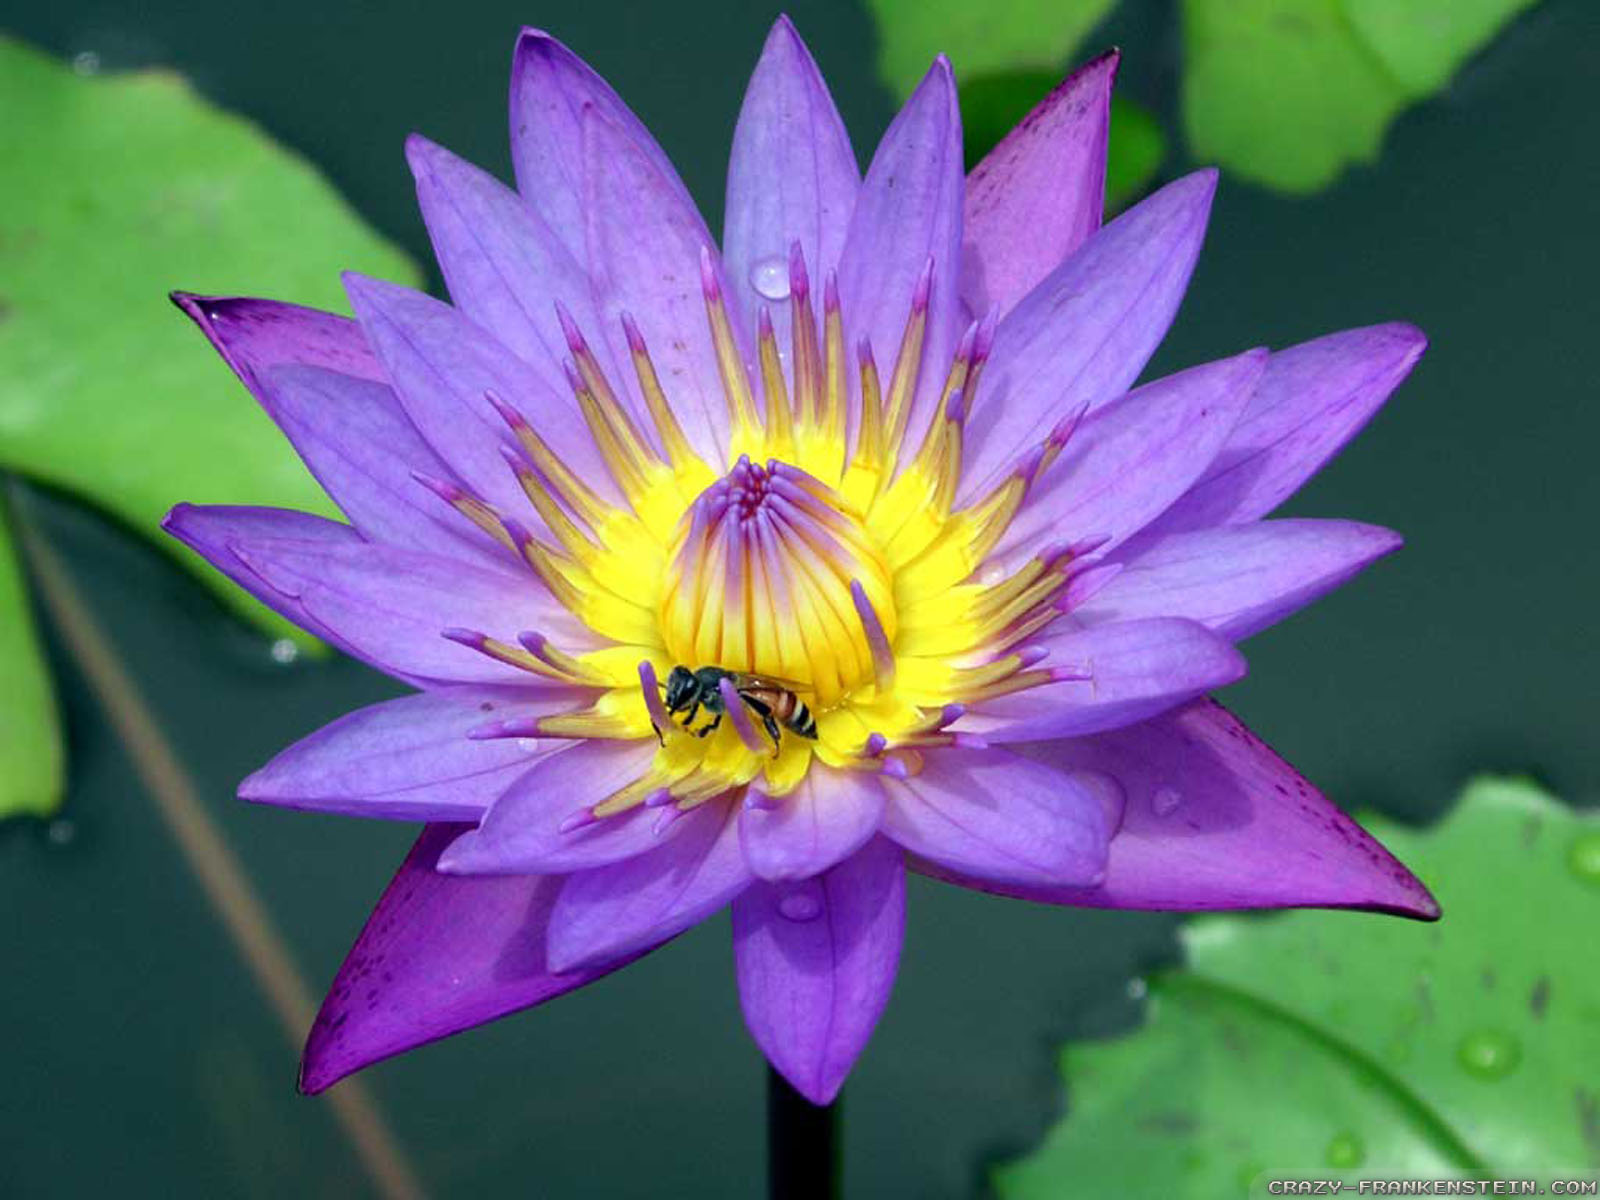 Purple Lotus Flower Wallpaper For Iphone - Beautiful Flowers Of Thailand , HD Wallpaper & Backgrounds